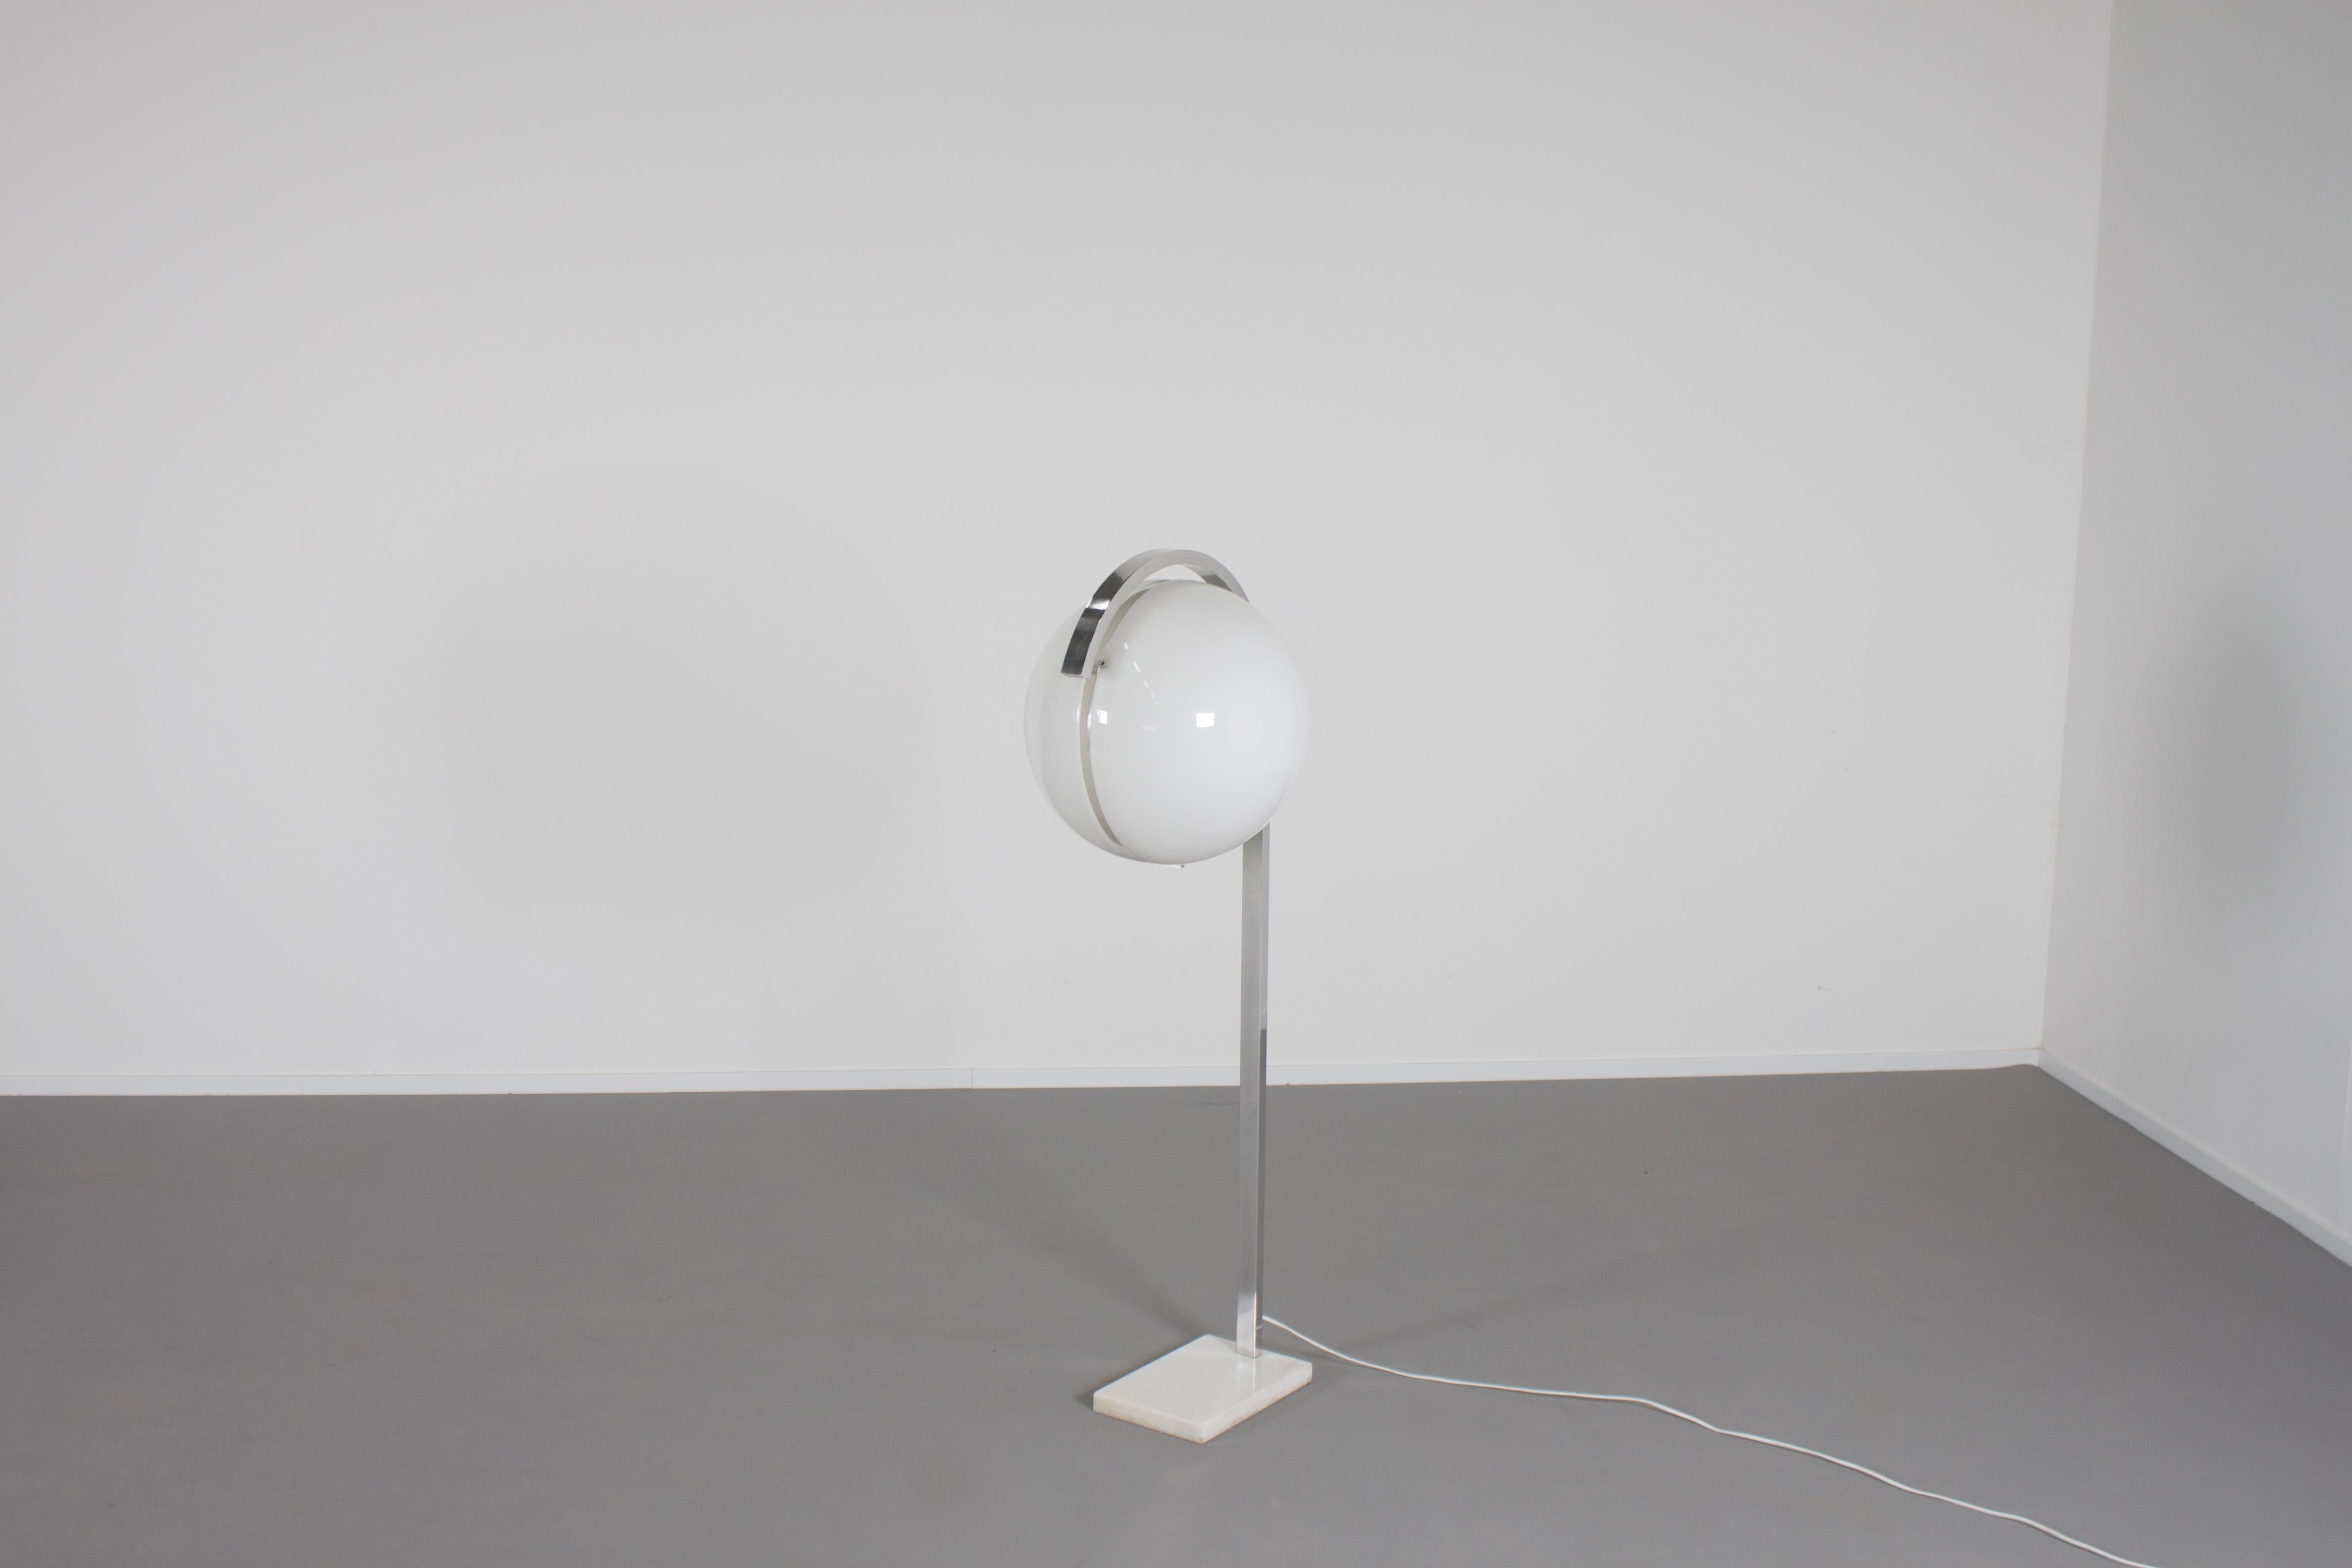 Space age floor lamp is very good condition.

Made in the 1960s by a smaal company called Acciarri, Italy.

The large globe shaped lampshade is made of white acrylic and seems to hoover when lit.
It is made of two parts, one has a hole for changing